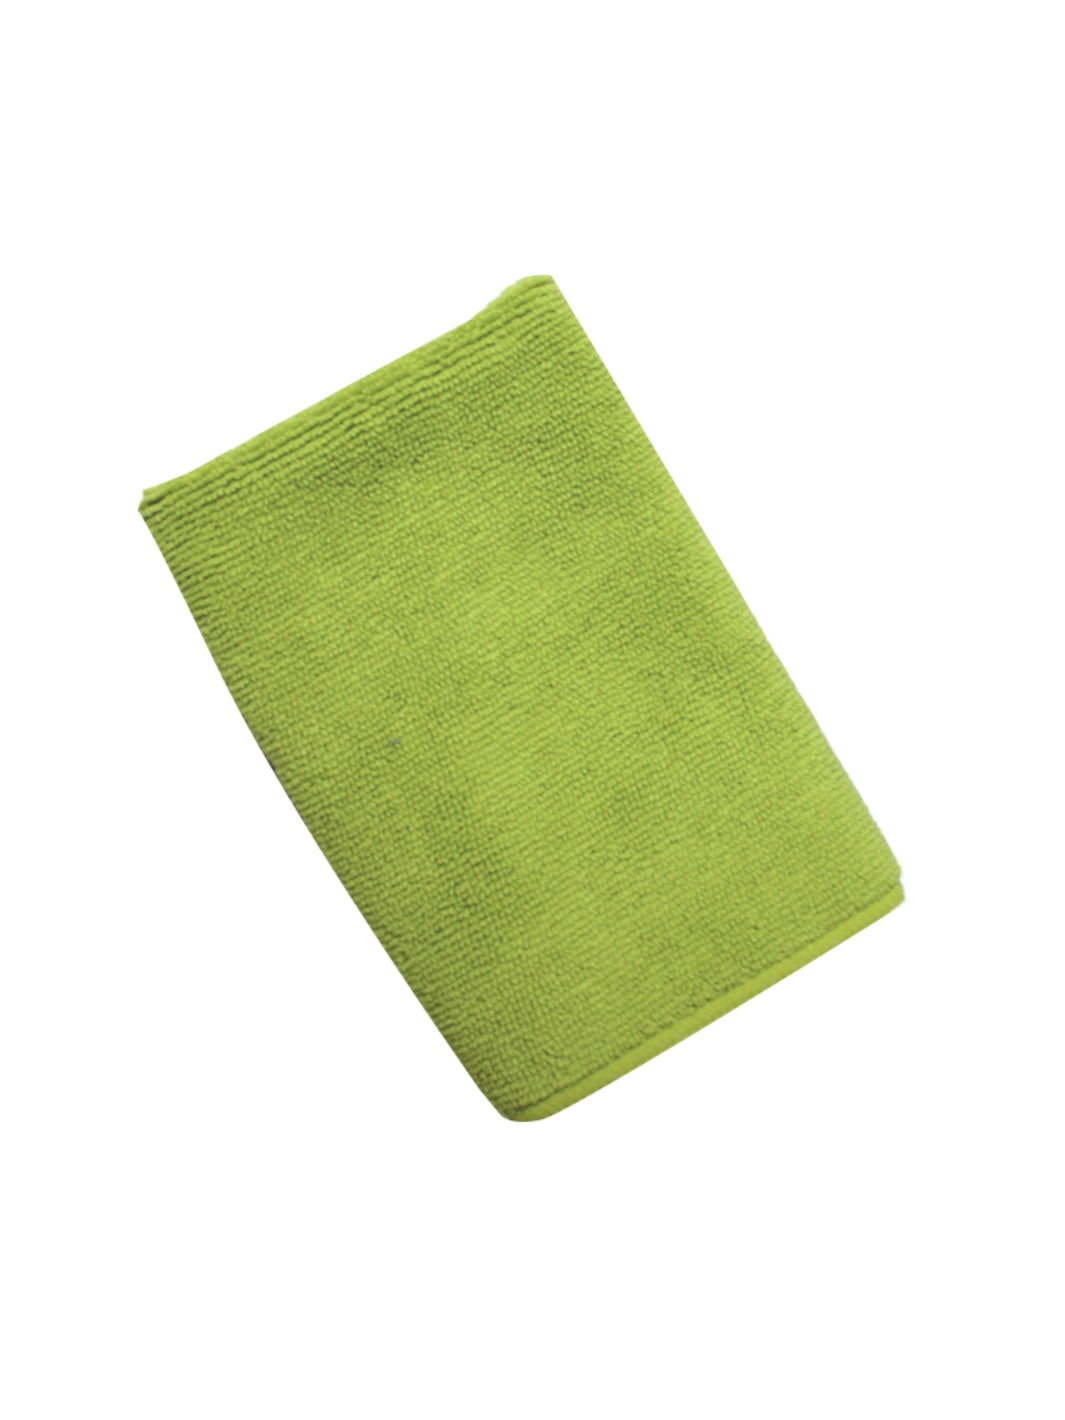 CAFETTO Cleaning Cloth